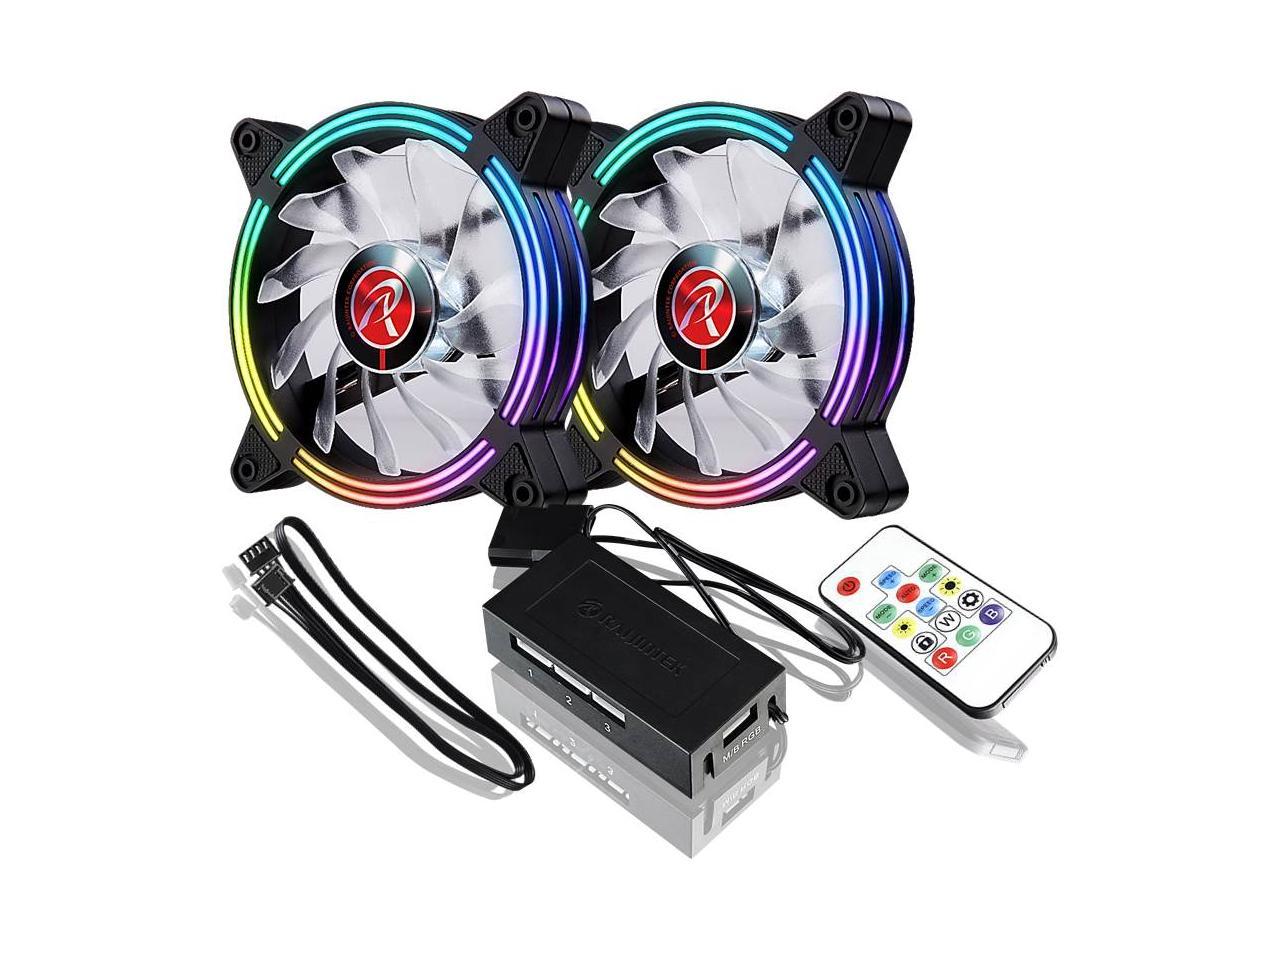 SKLERA 12 RBW ADD -2 pack, Addressable RGB, 12025 PWM fan, with 8 port Addressable LED hub, Remote controller & Connecting M/B cable, compatible with ASUS/MSI 5V ADD header, brings visible color